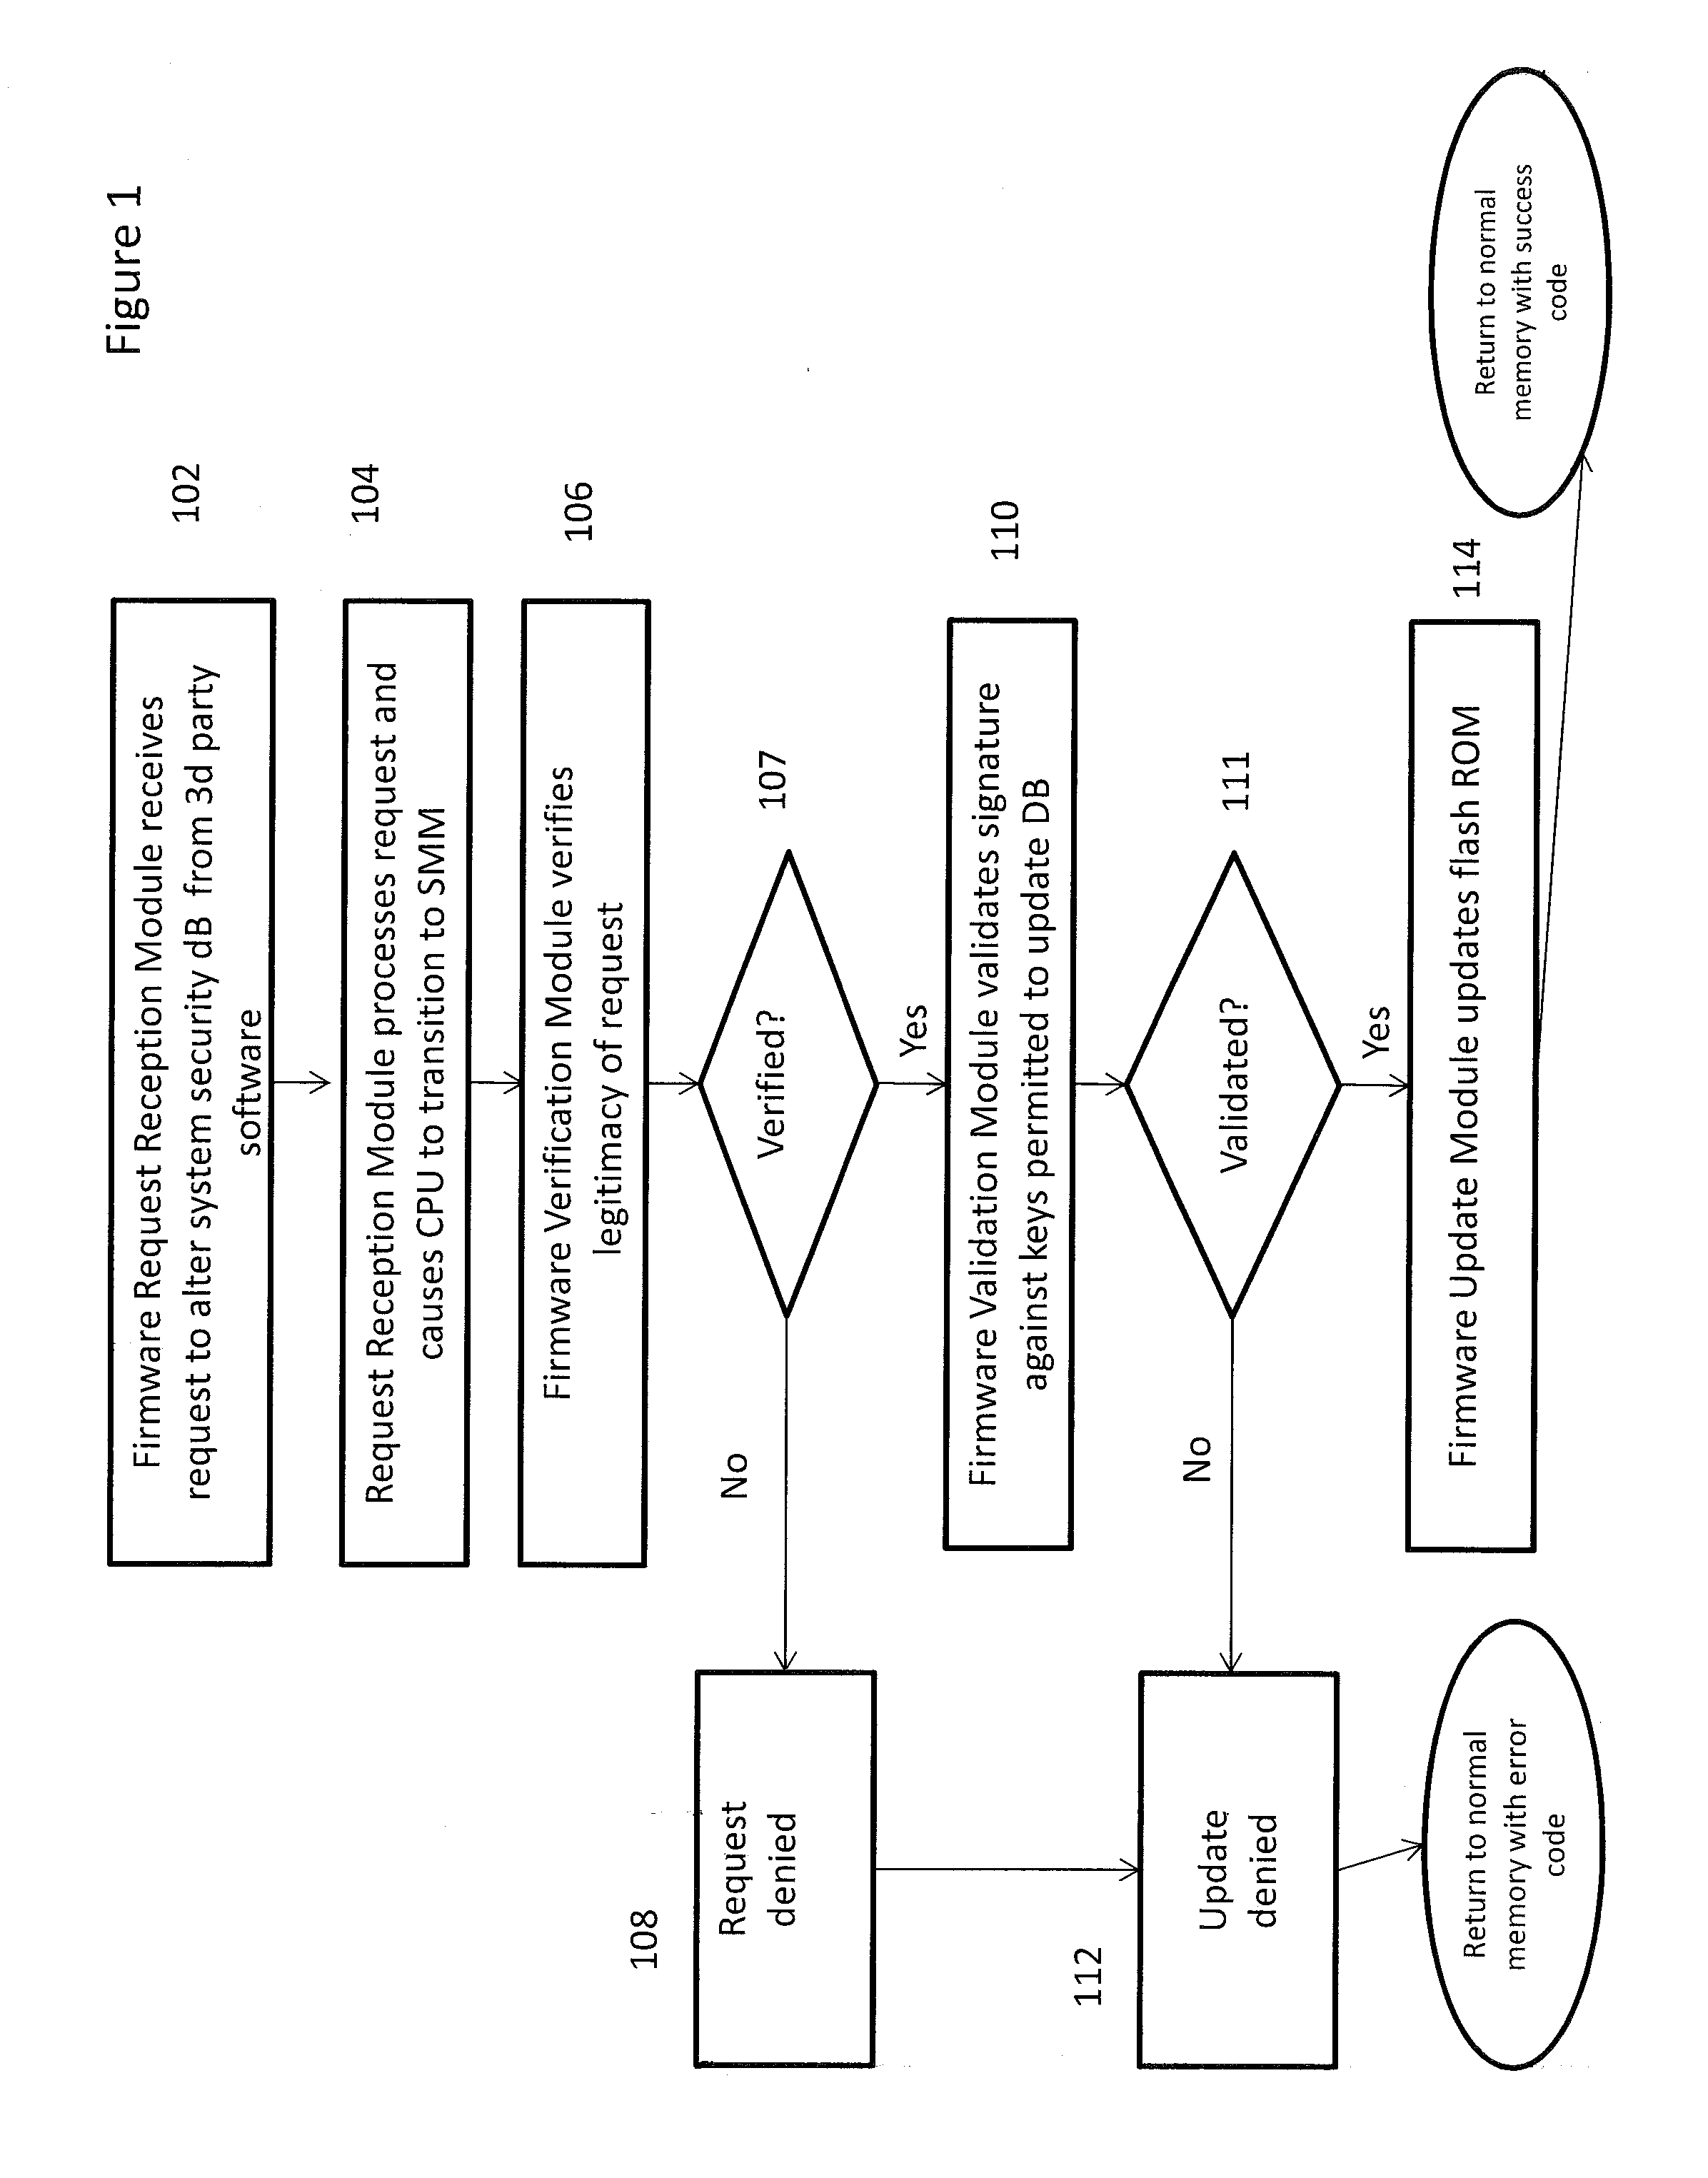 System and method for processing requests to alter system security databases and firmware stores in a unified extensible firmware interface-compliant computing device